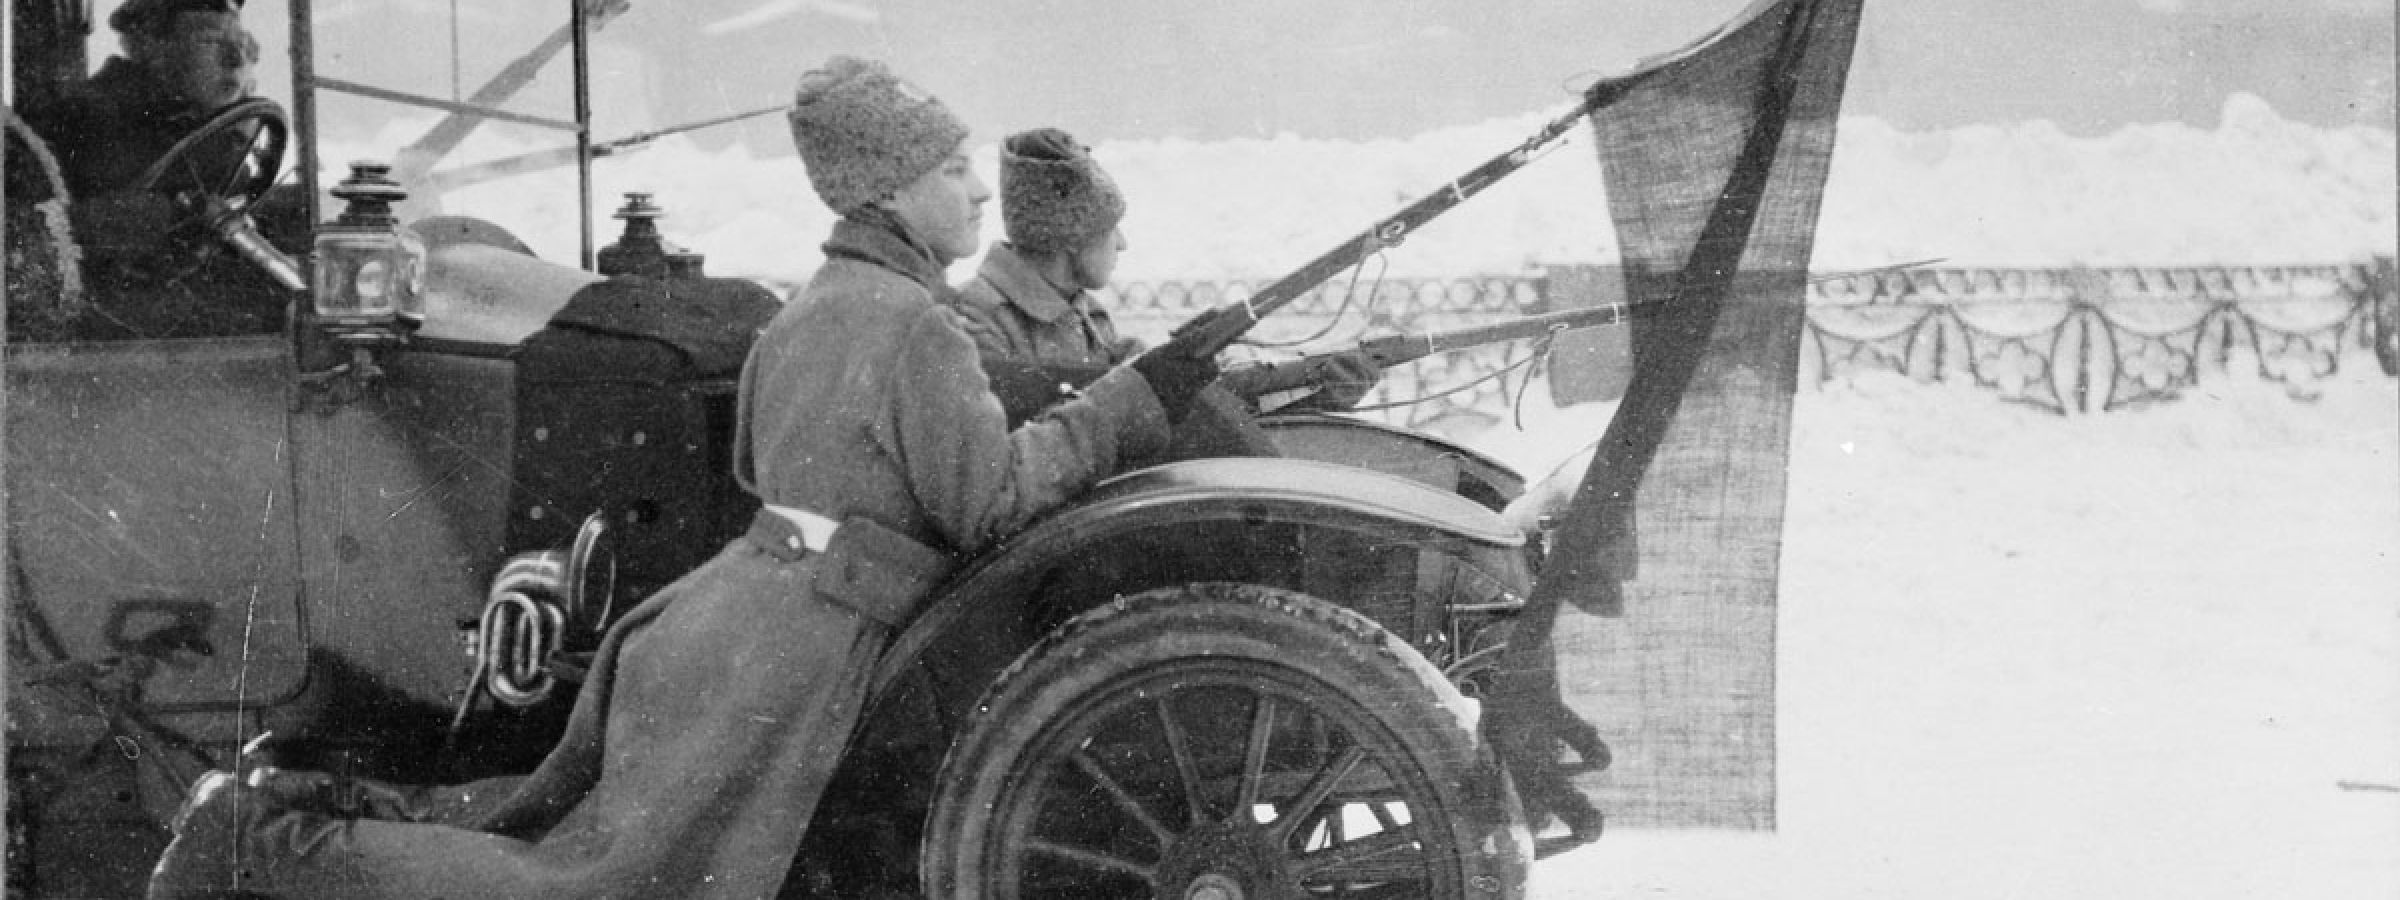 Two Russian soldiers, travelling via motor car through Petrograd, hold red flags affixed to their rifles during the revolution.